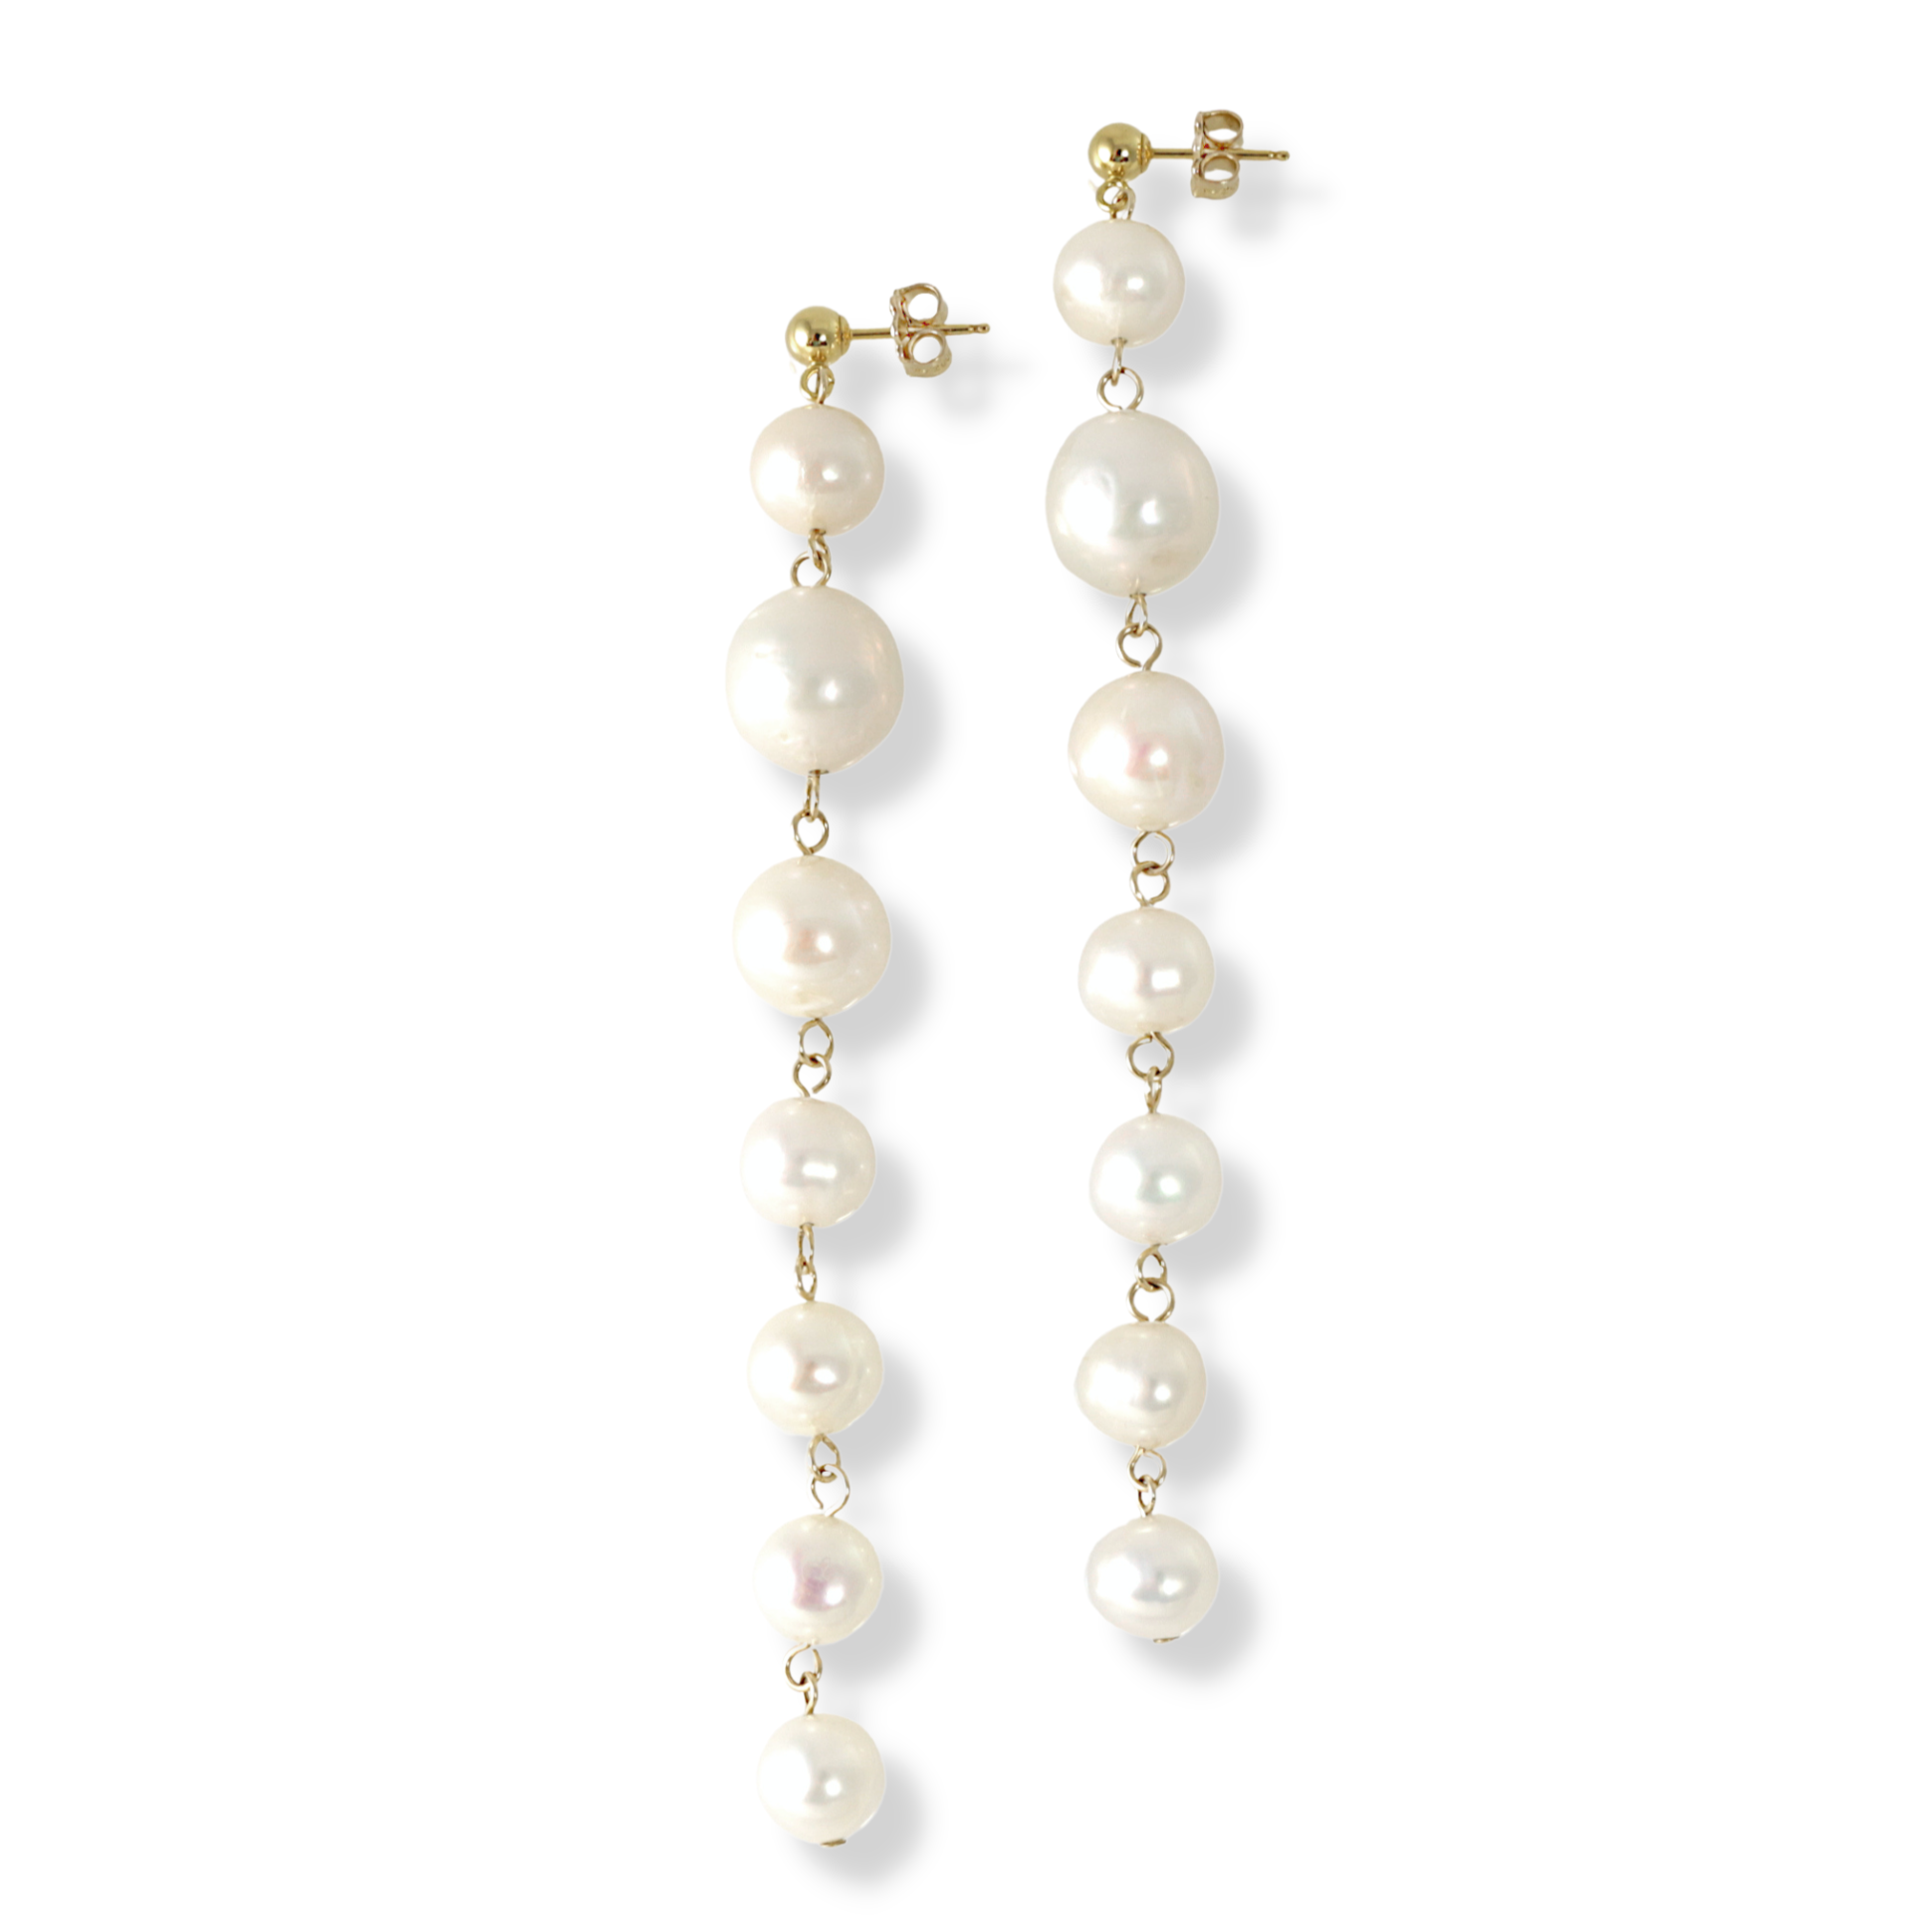 Elegant, white Freshwater pearl earrings consisting of 7 pearls in varying sizes, connected with 14 karat gold filled links and 14 karat gold filled post.